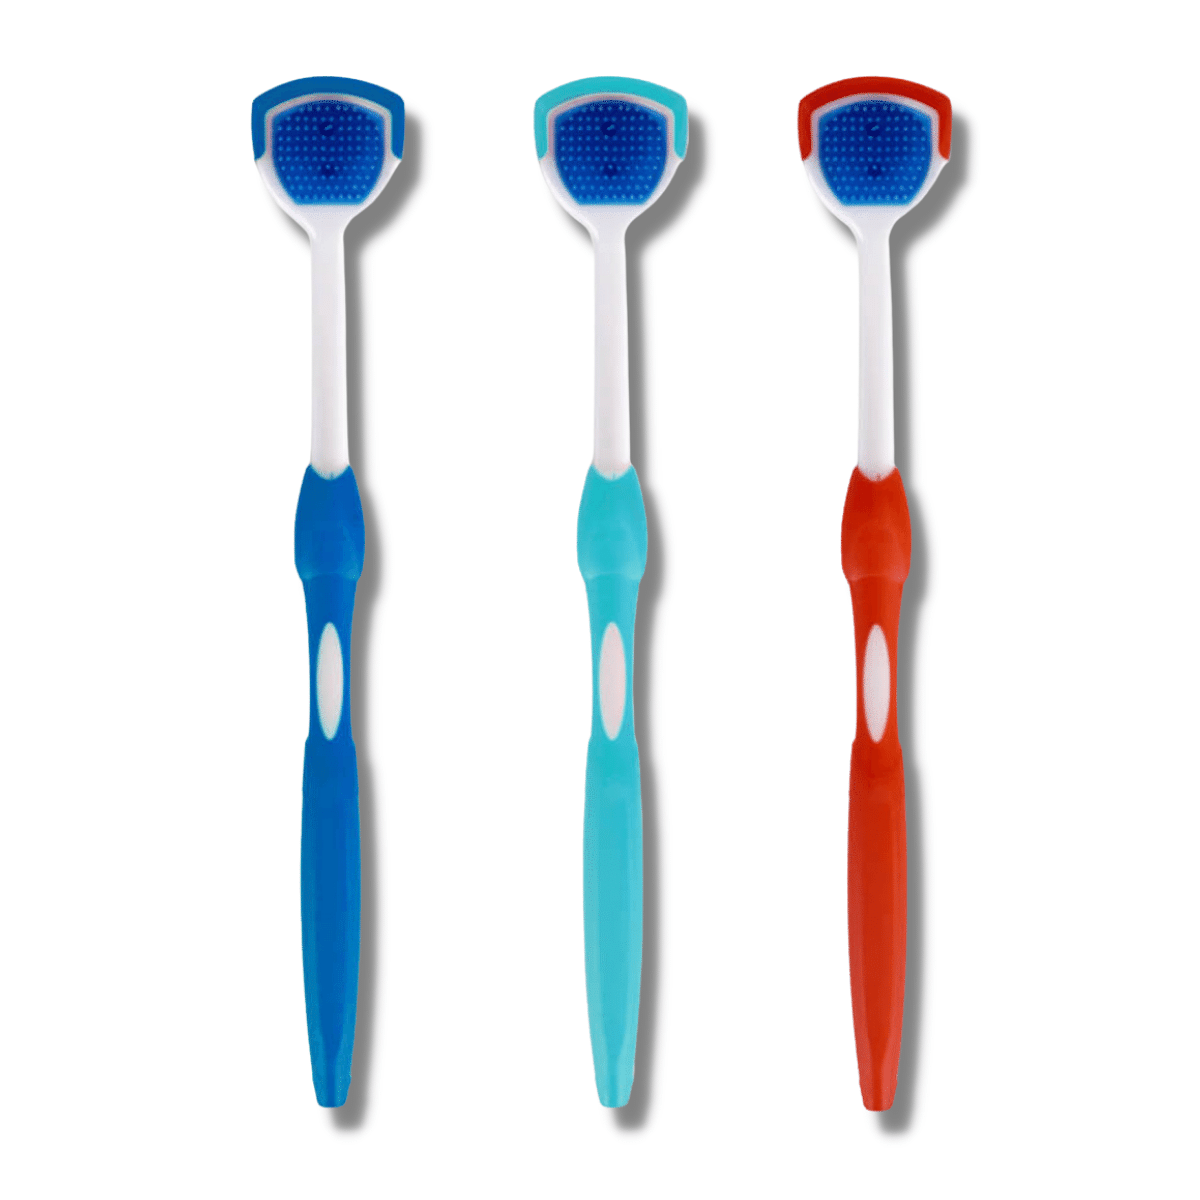 Tongue Brush | Smile Therapy - Smile Therapy